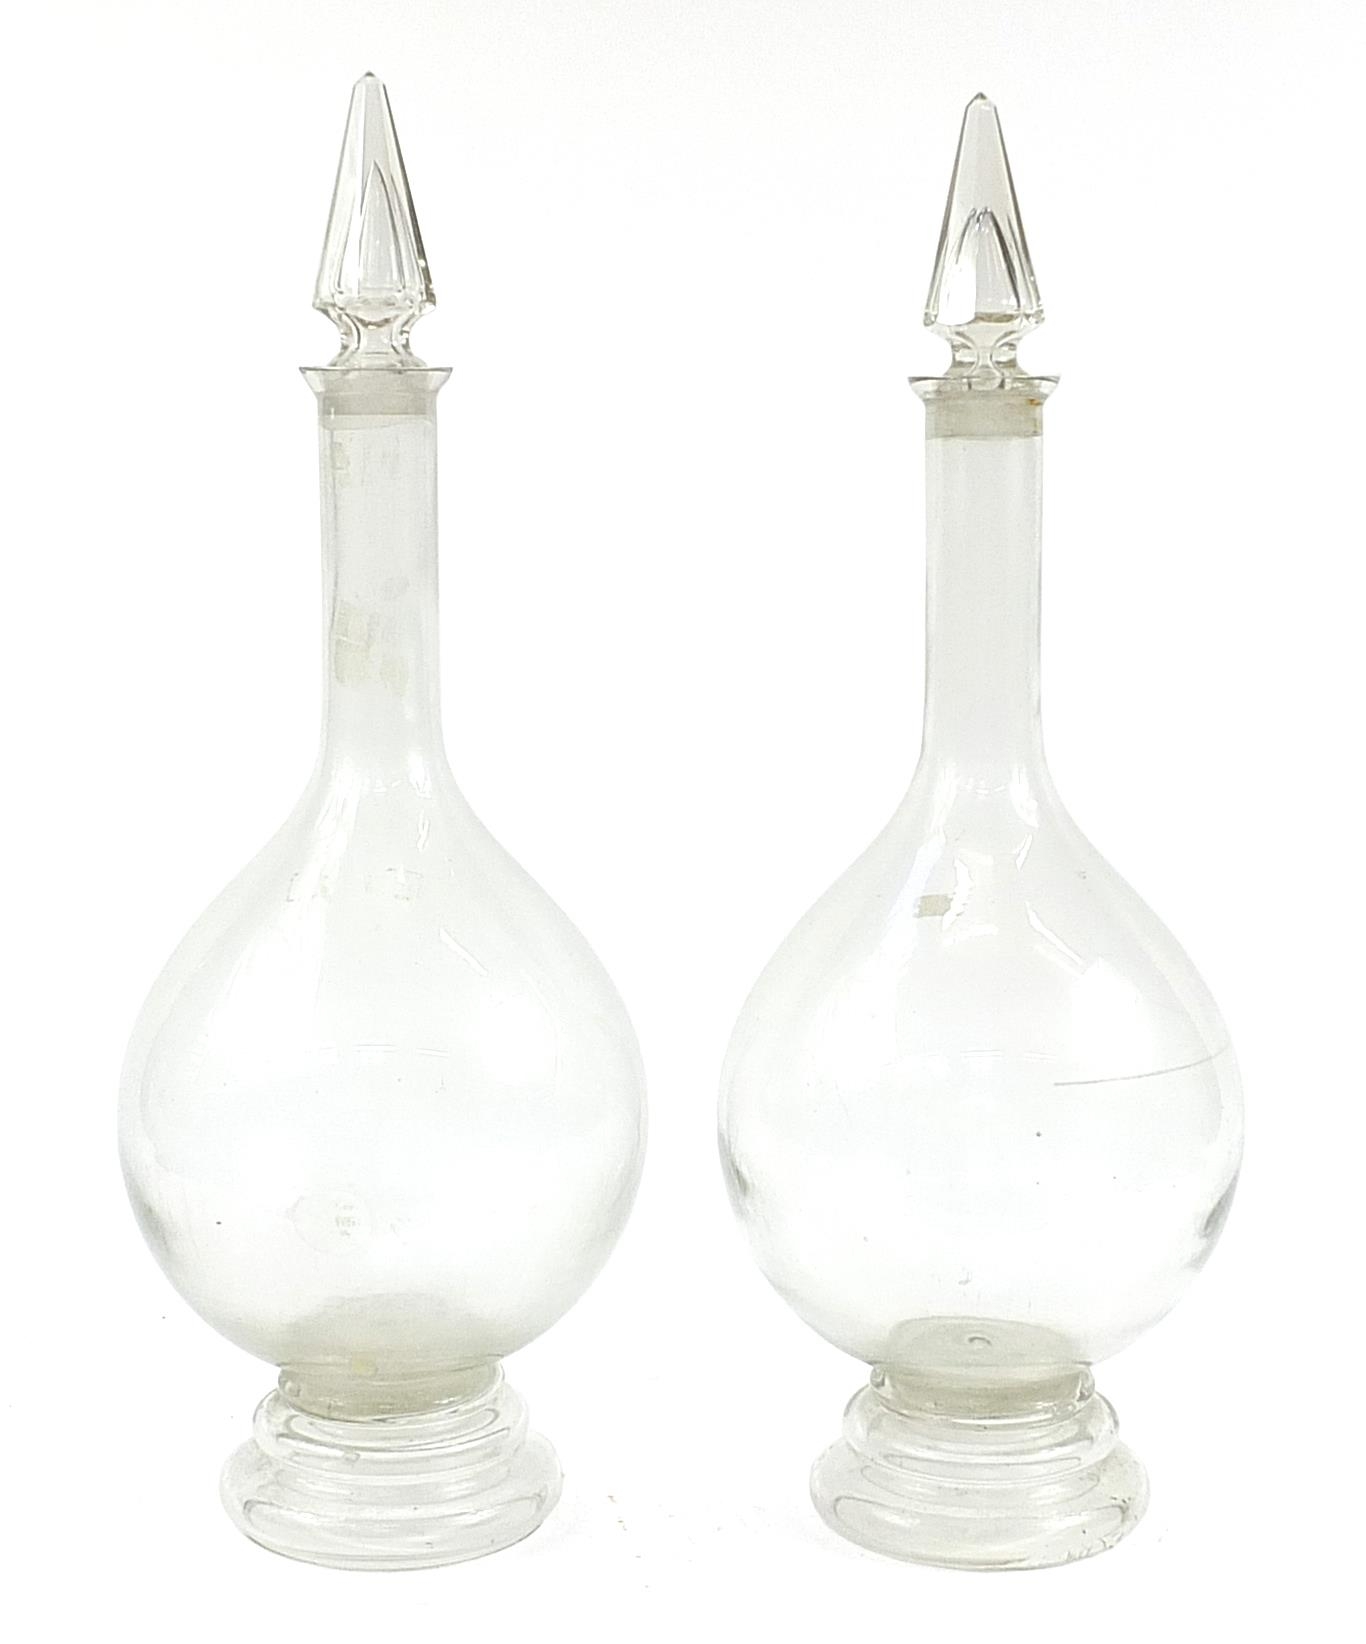 Pair of large 19th century apothecary glass jars with stoppers, each 81cm high - Image 2 of 3